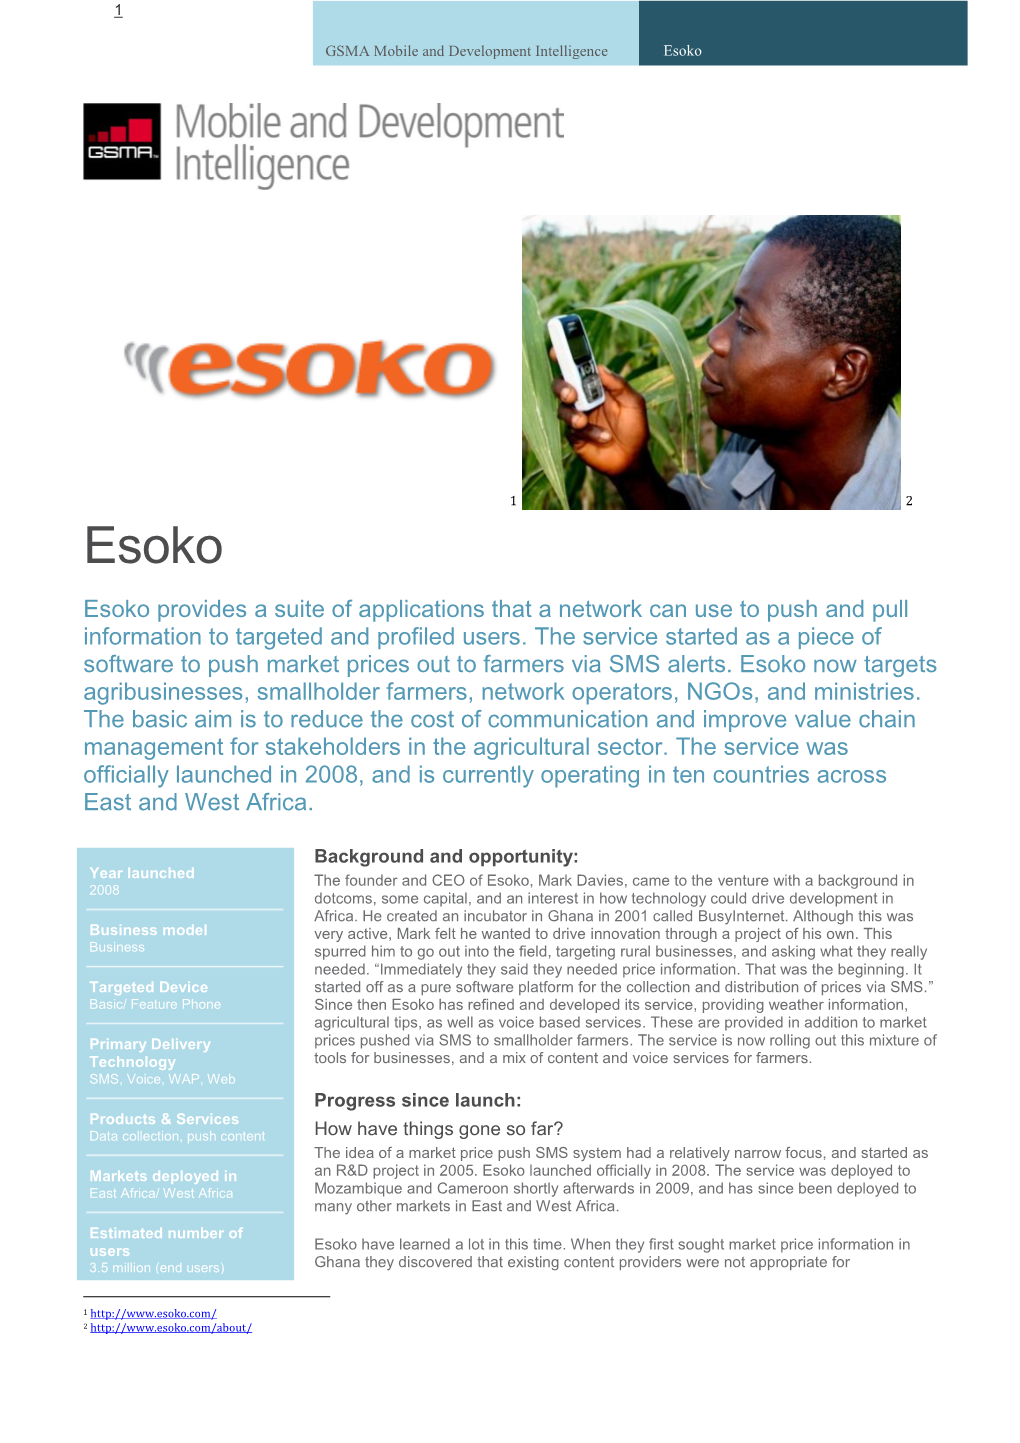 Esoko Provides a Suite of Applications That a Network Can Use to Push and Pull Information to Targeted and Profiled Users